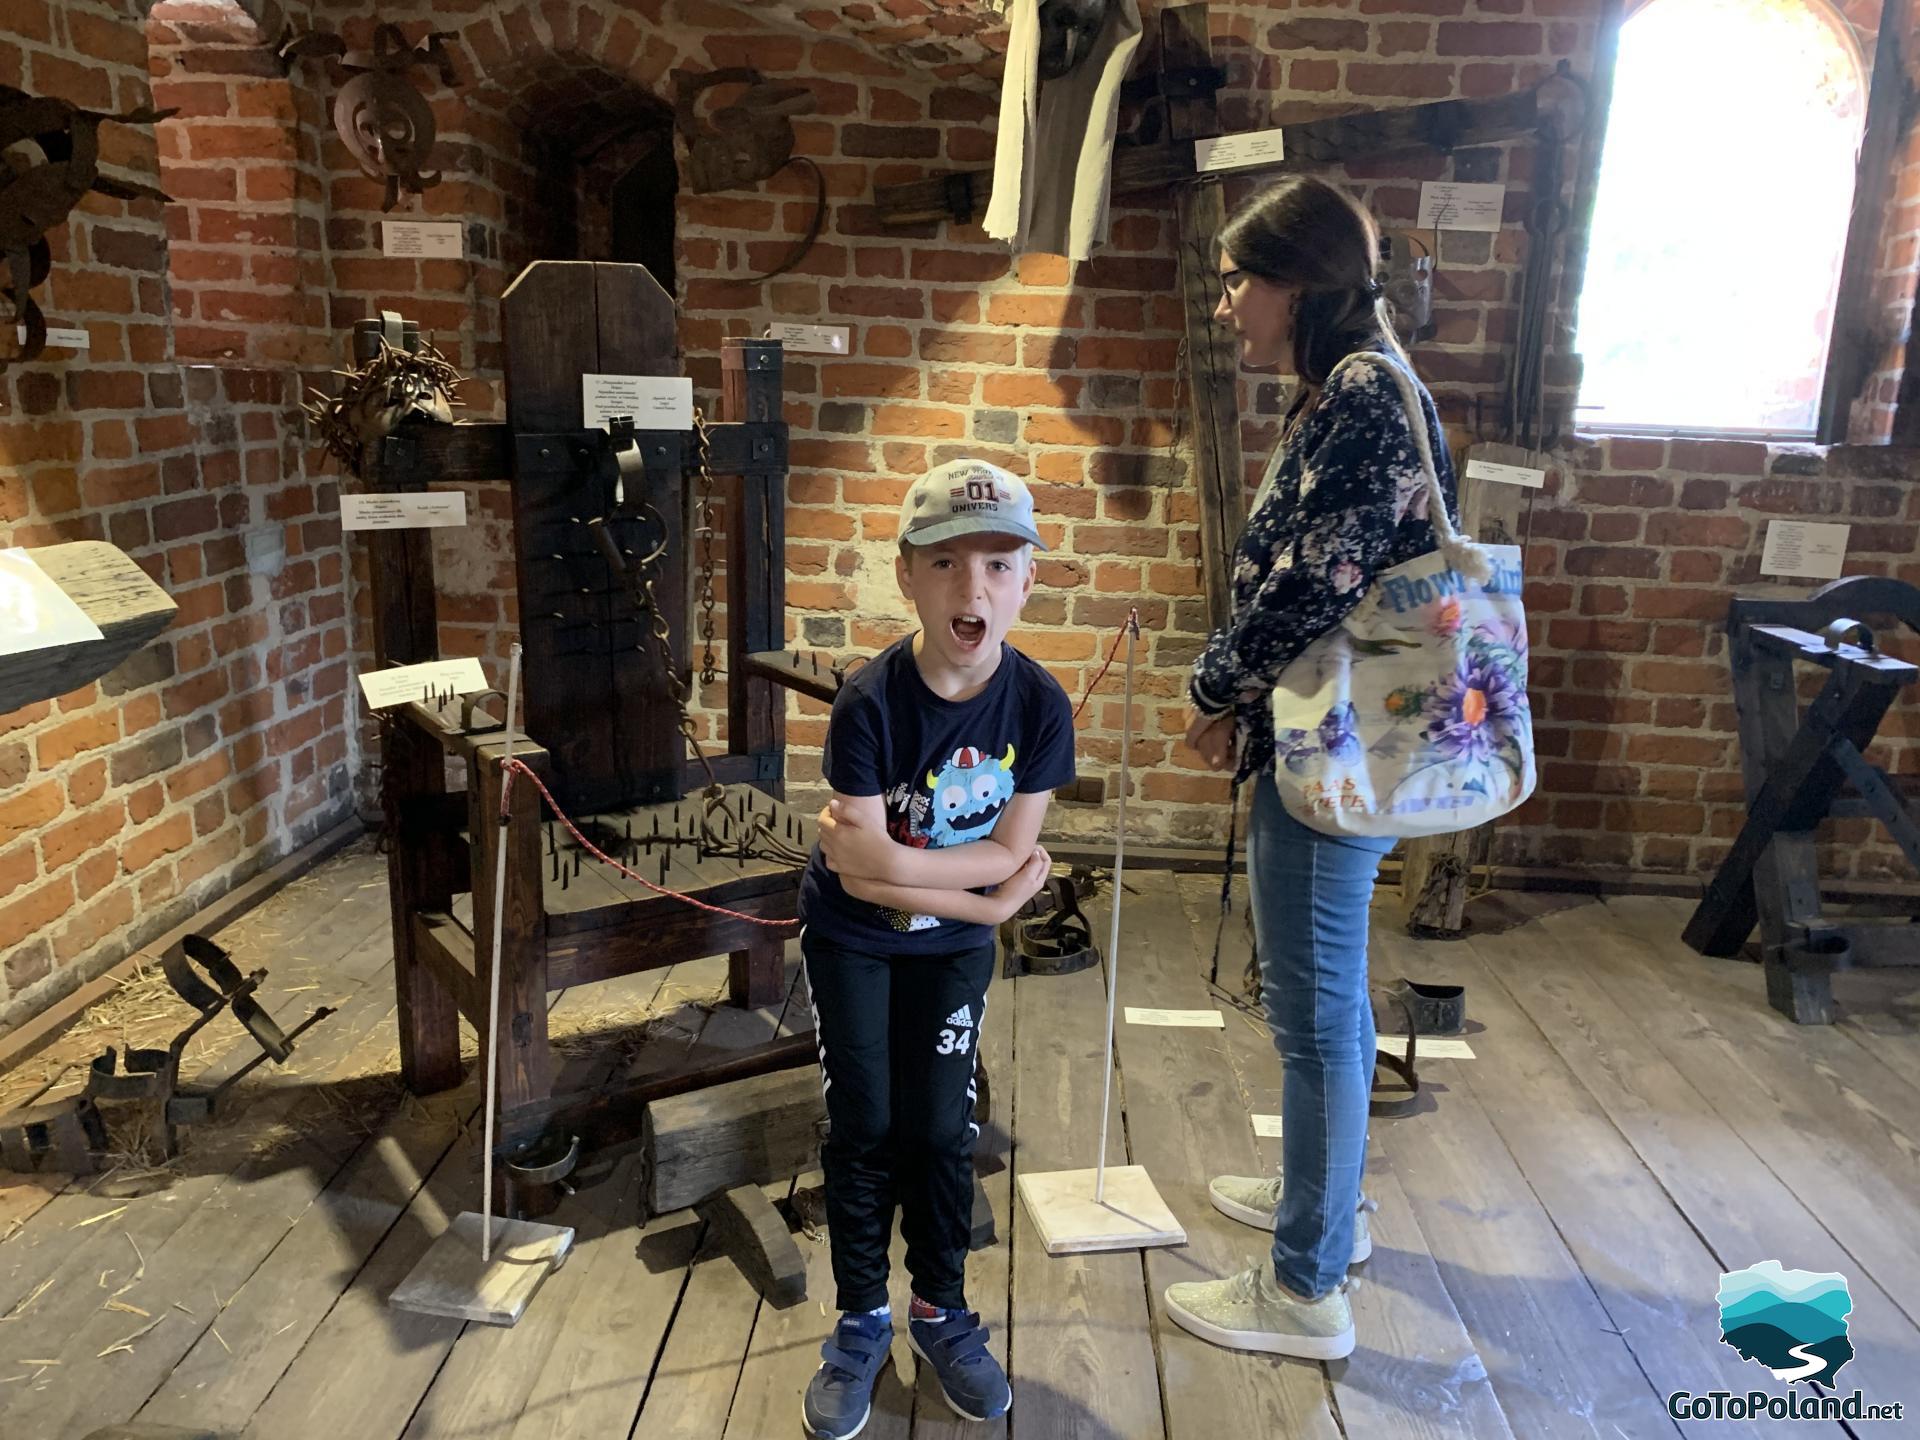 a woman and a boy are in a room which is filled with old instruments of torture, one of them is a chair with spikes